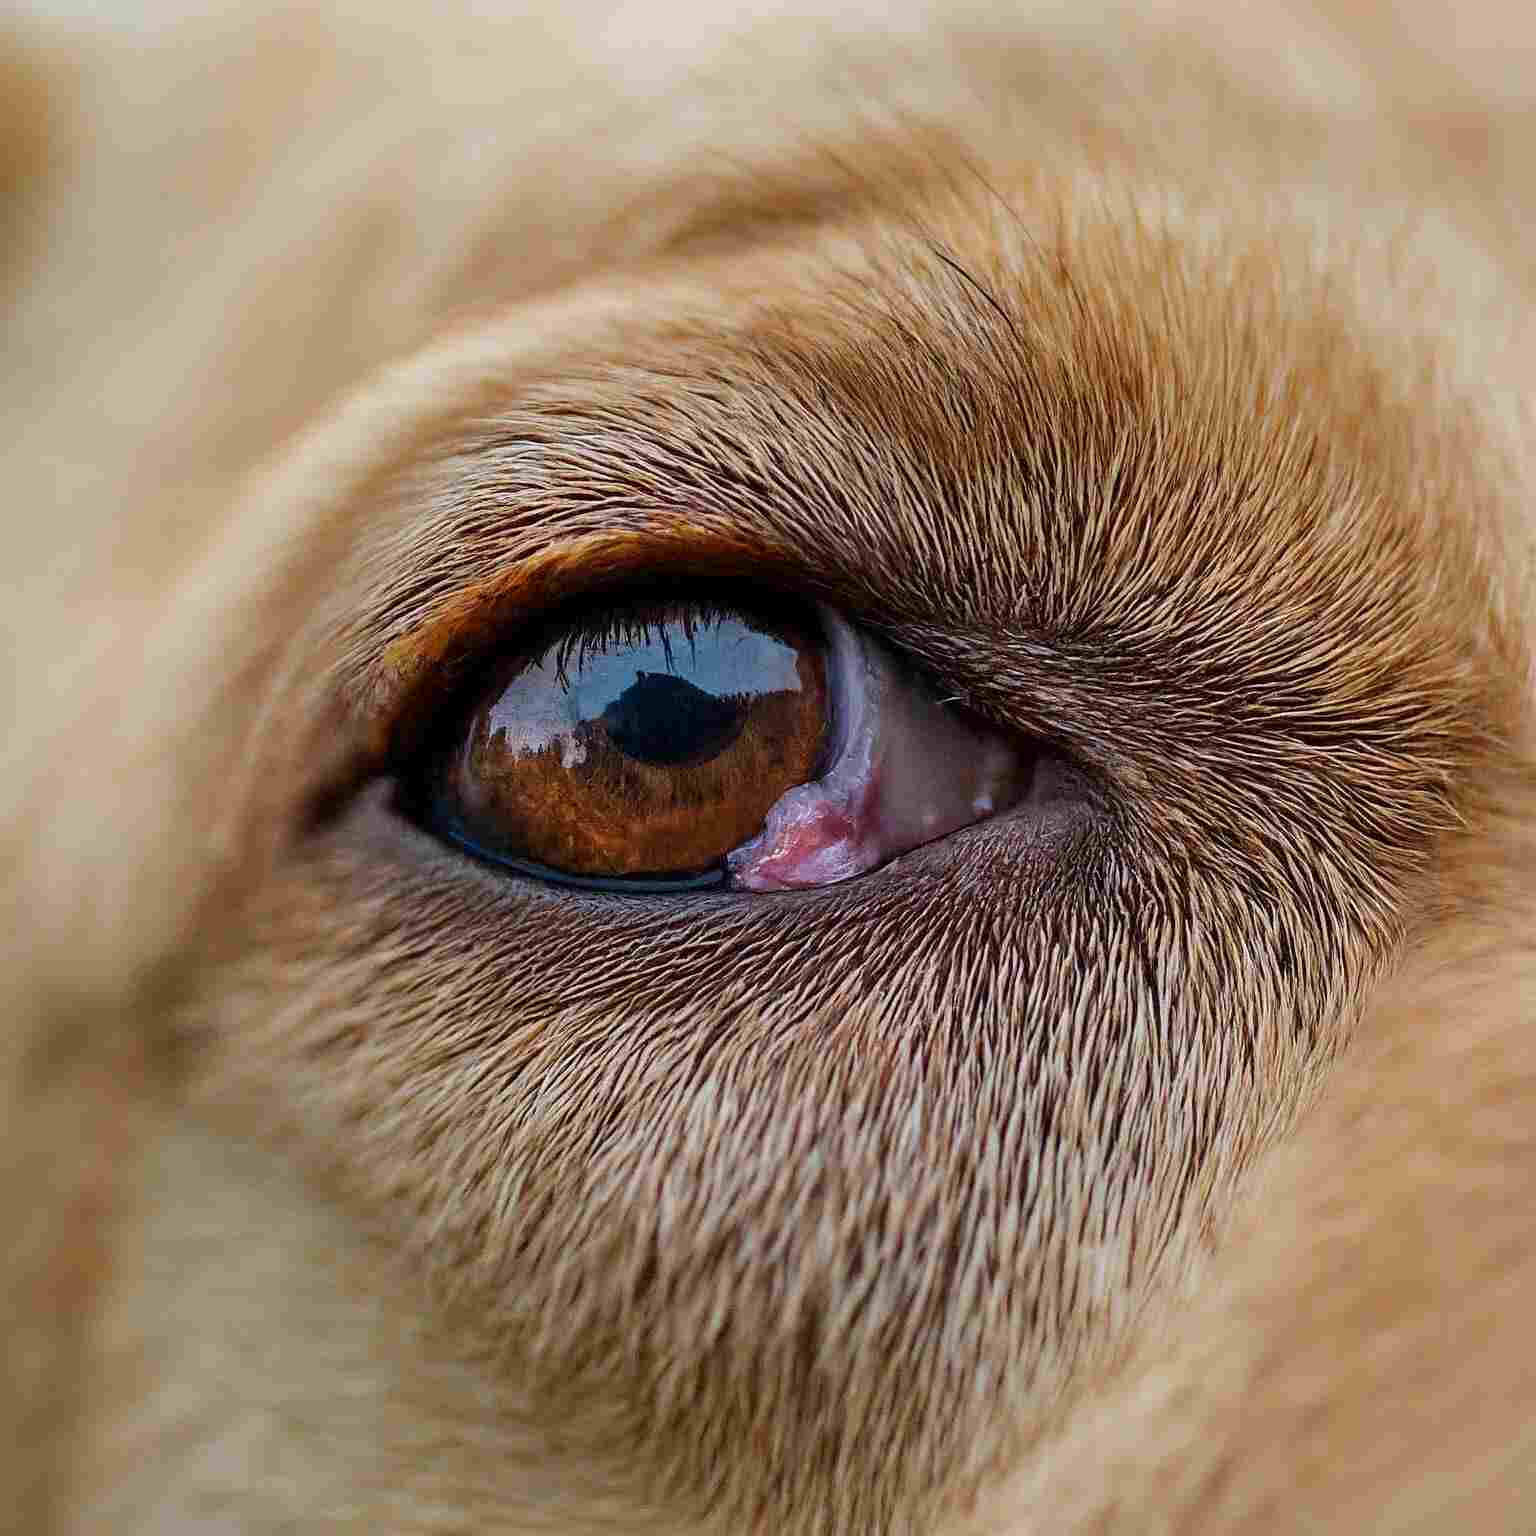 How to Treat Dogs Eye Infection